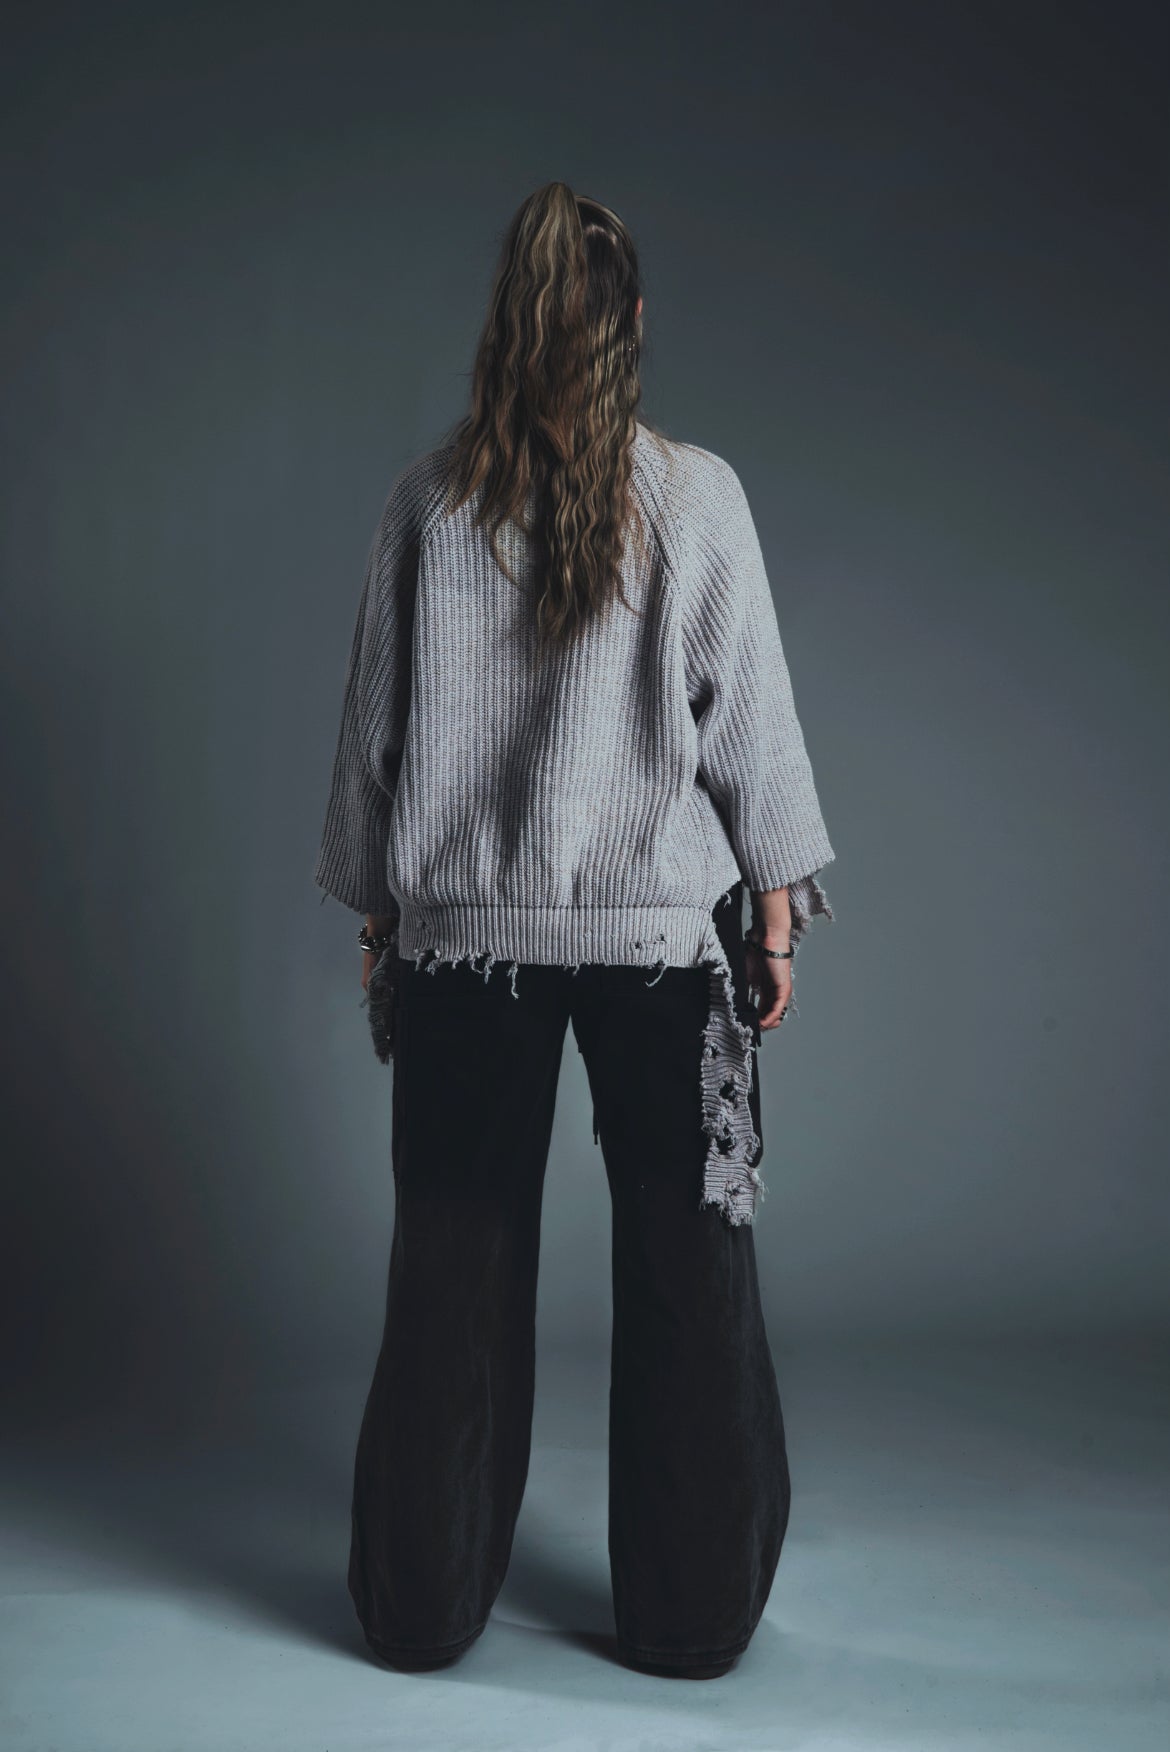 CARIANI® Destroyed Spike Sweater